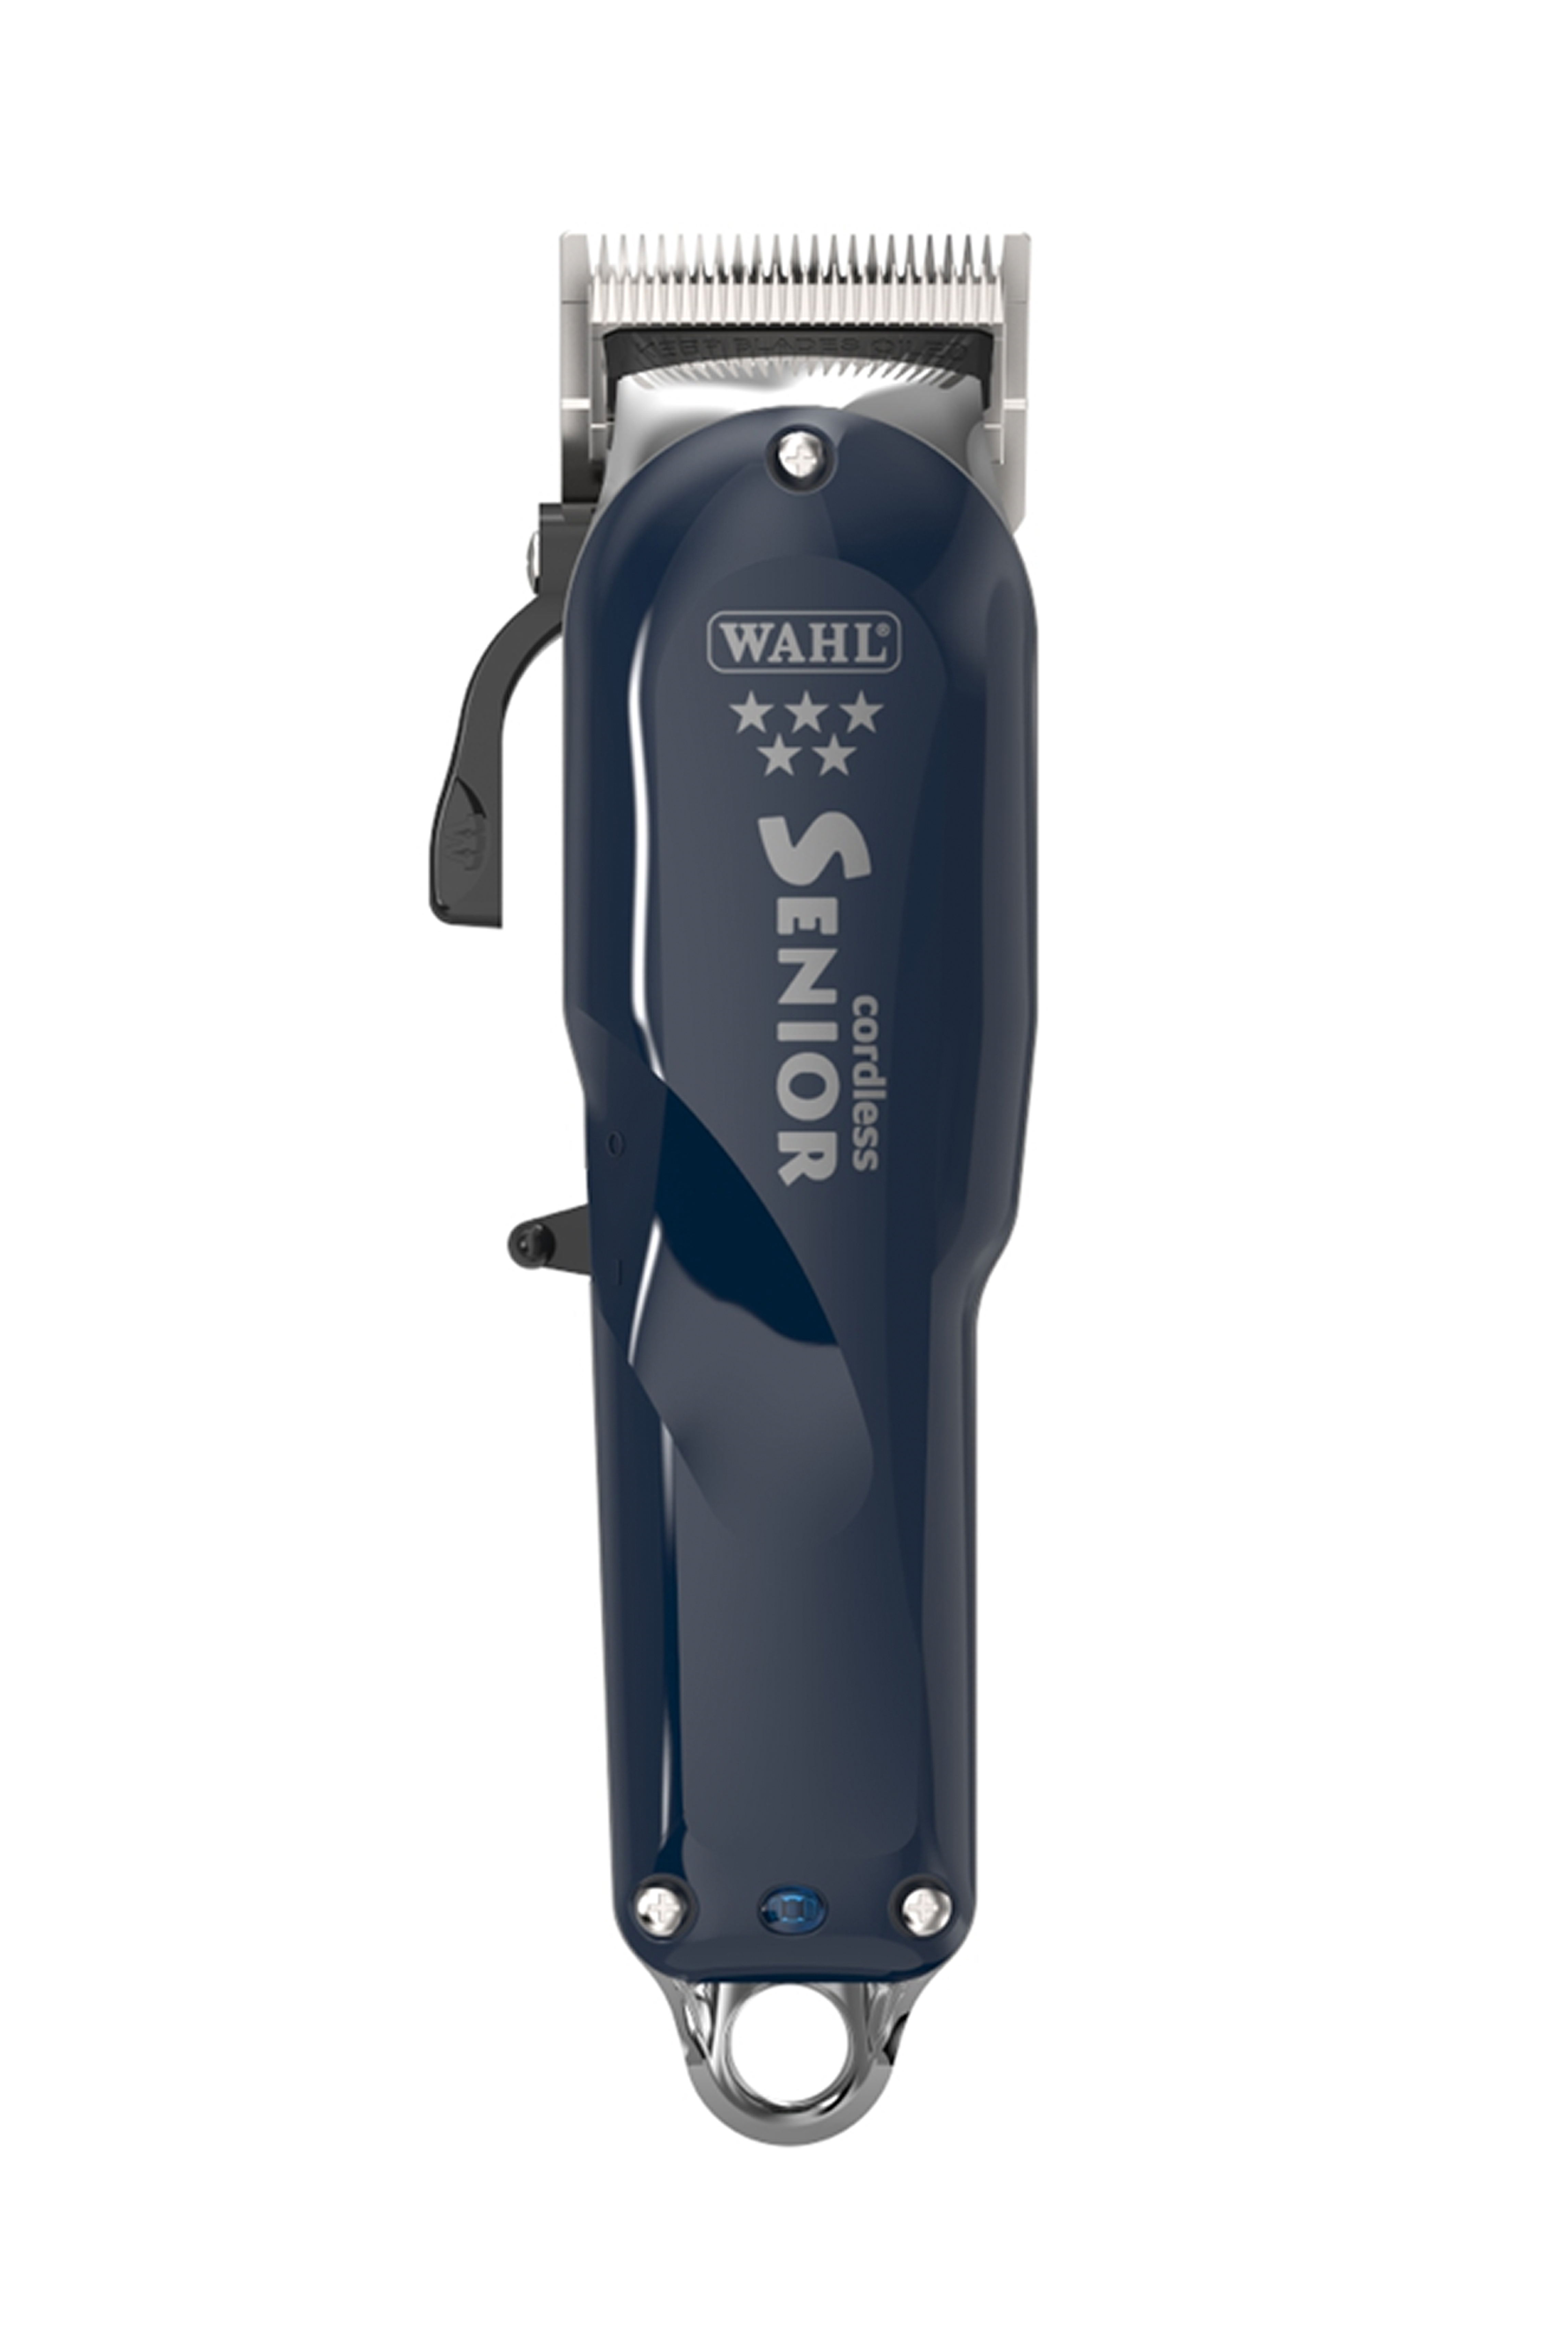 wahl trimmer cordless